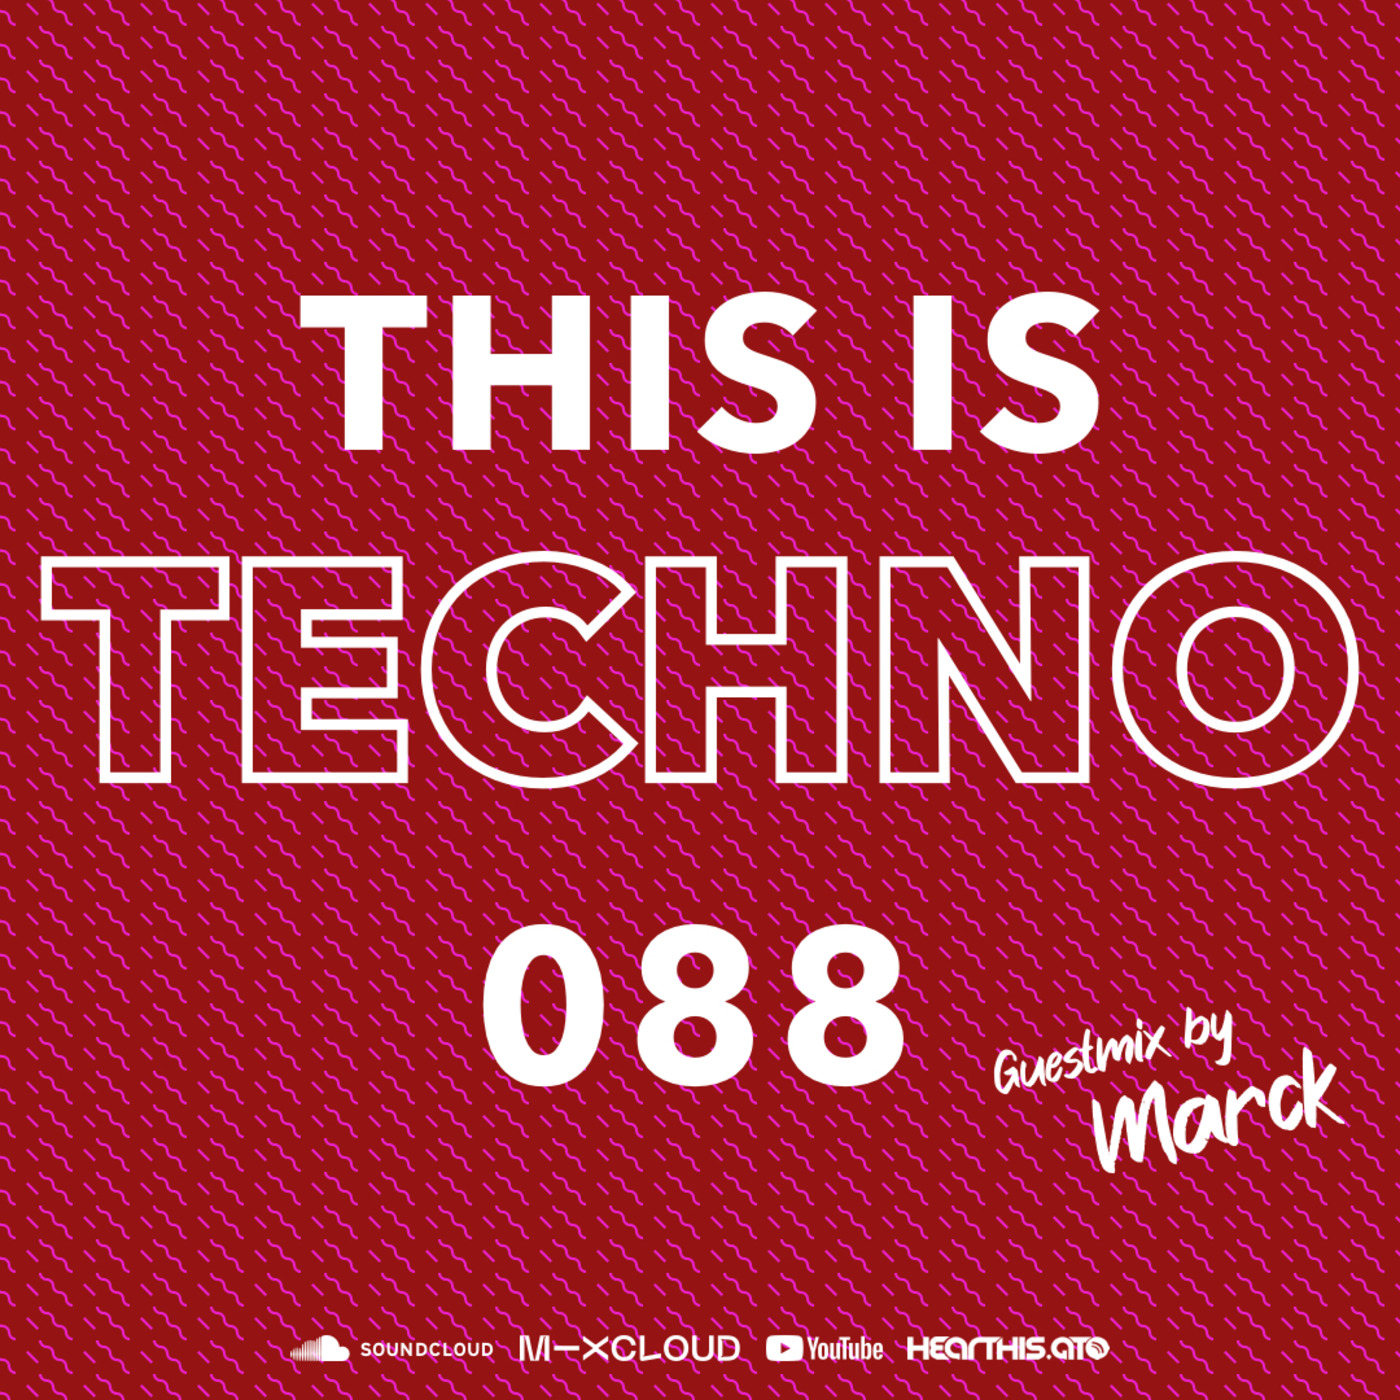 TIT088 - This Is Techno 088 By CSTS | Marck